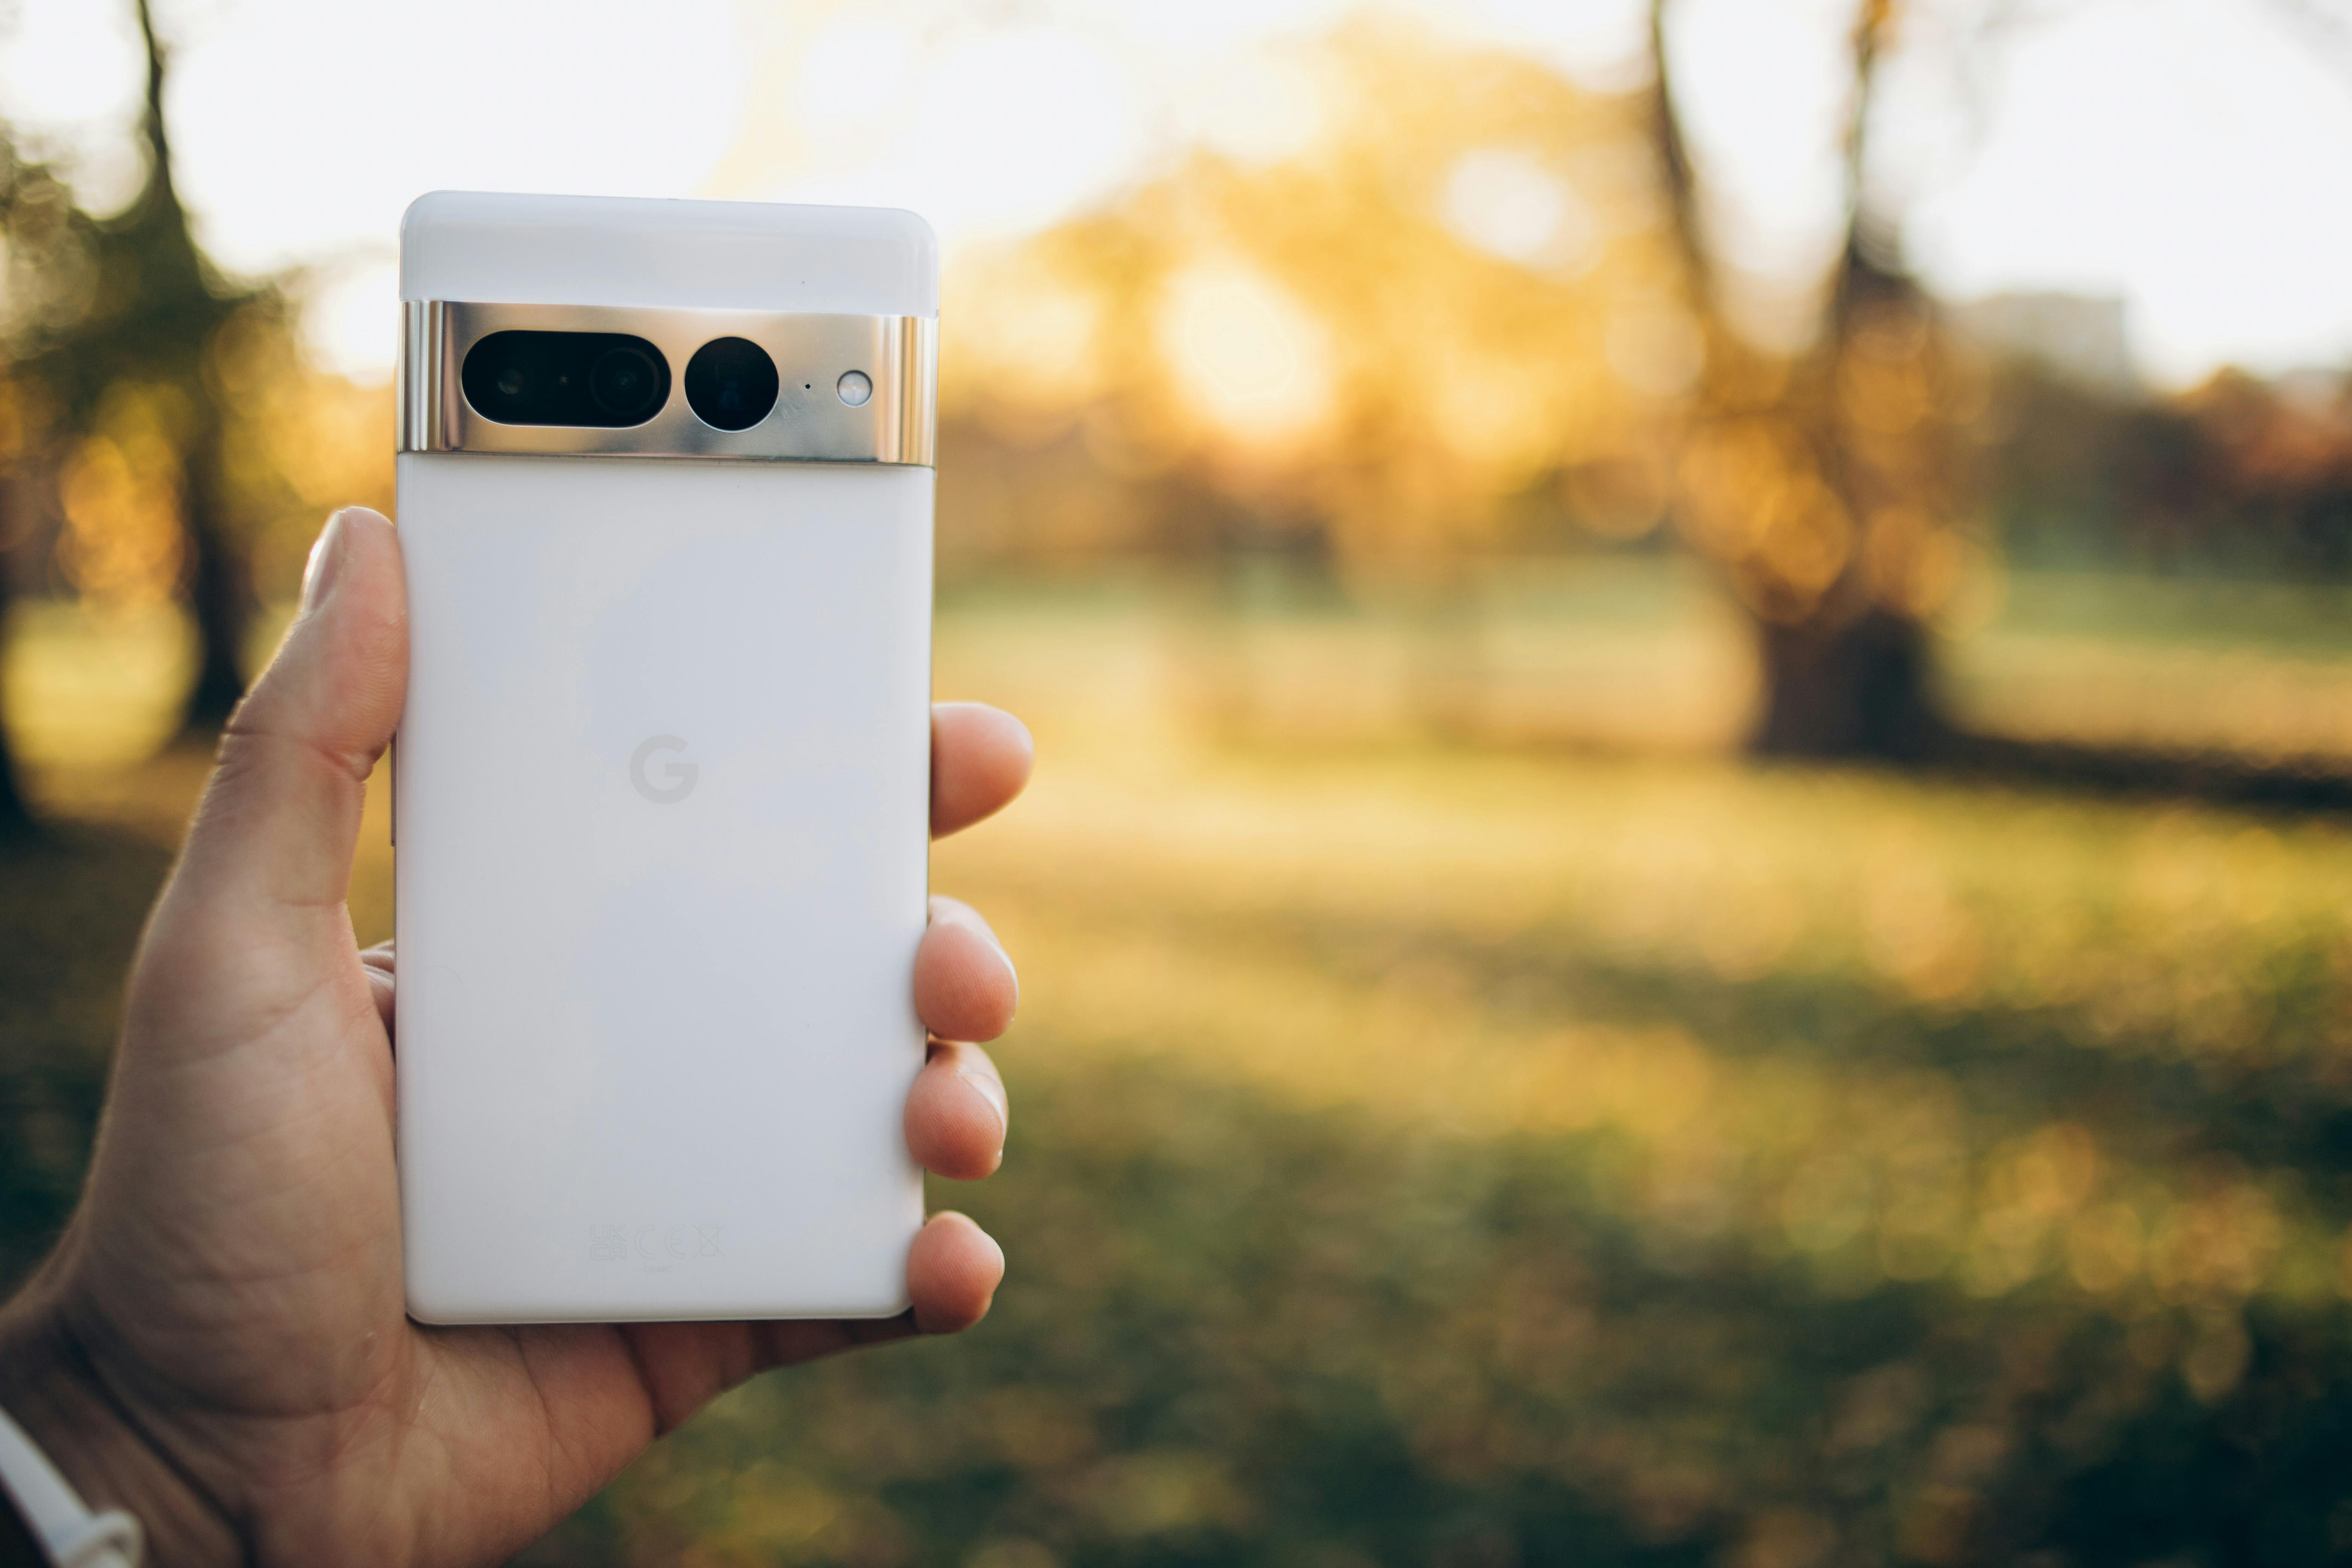 Close-up of a Person Holding a Google Pixel Smartphone · Free Stock Photo